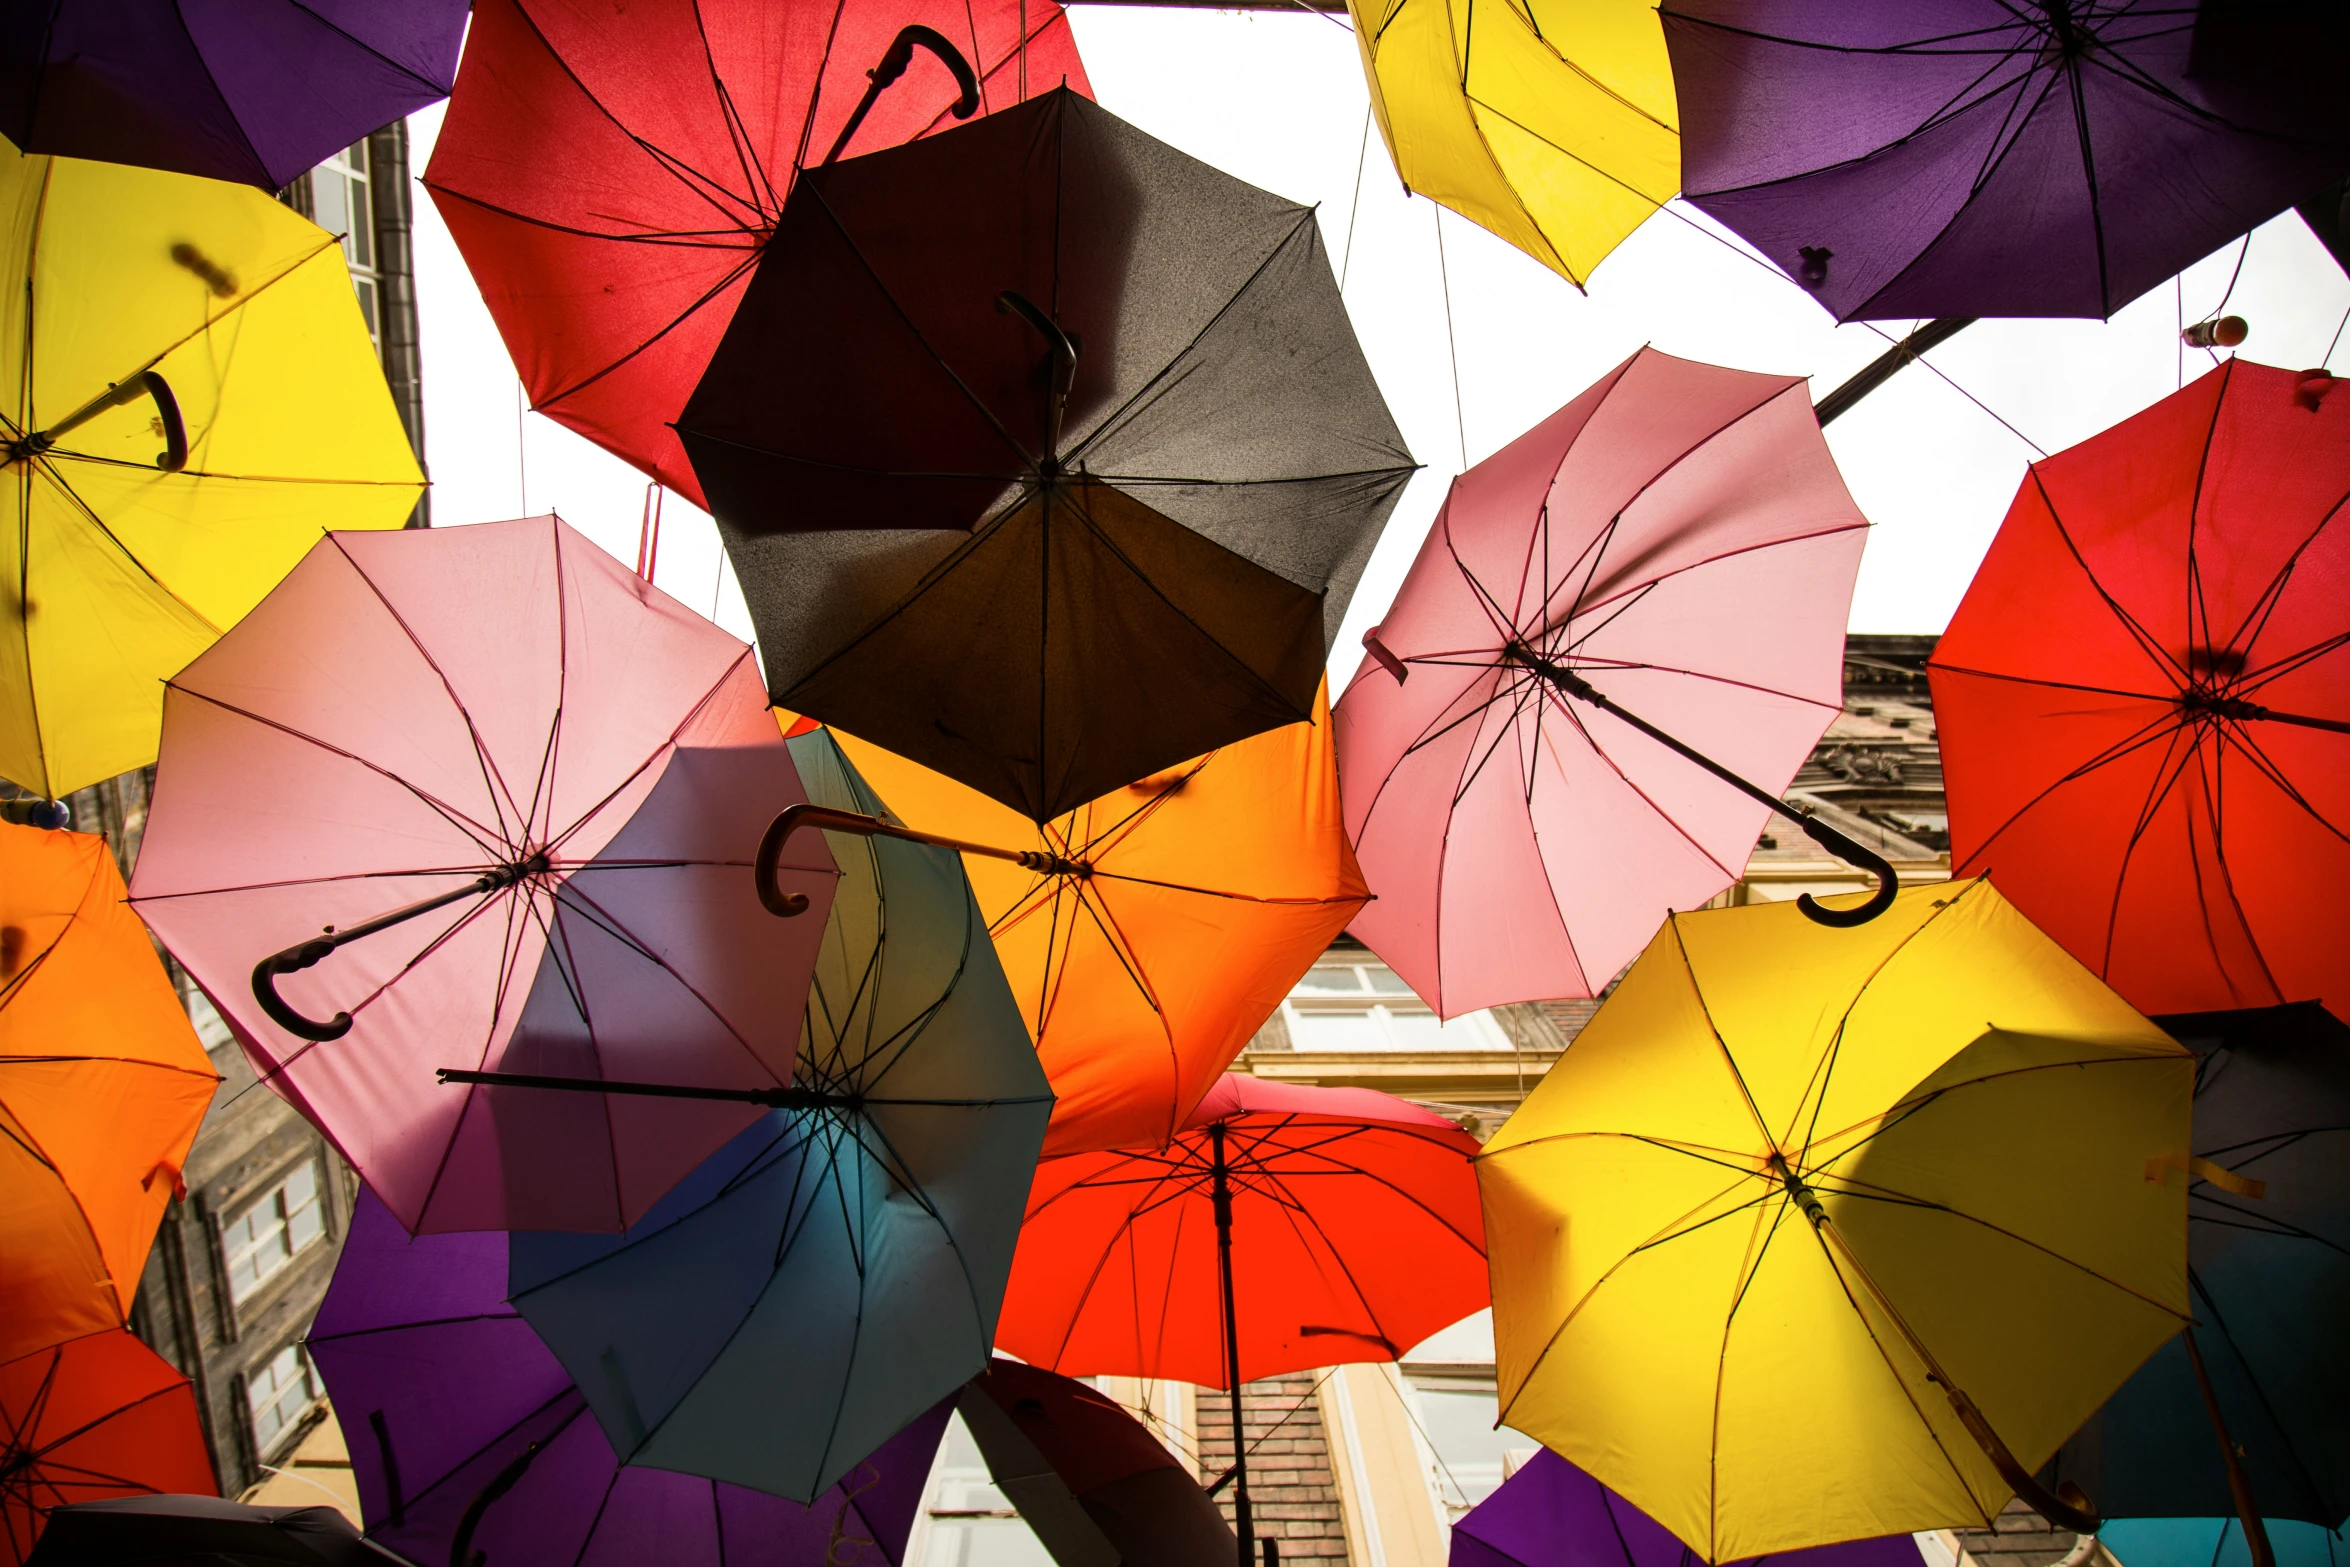 a group of colorful umbrellas that have their handles folded open